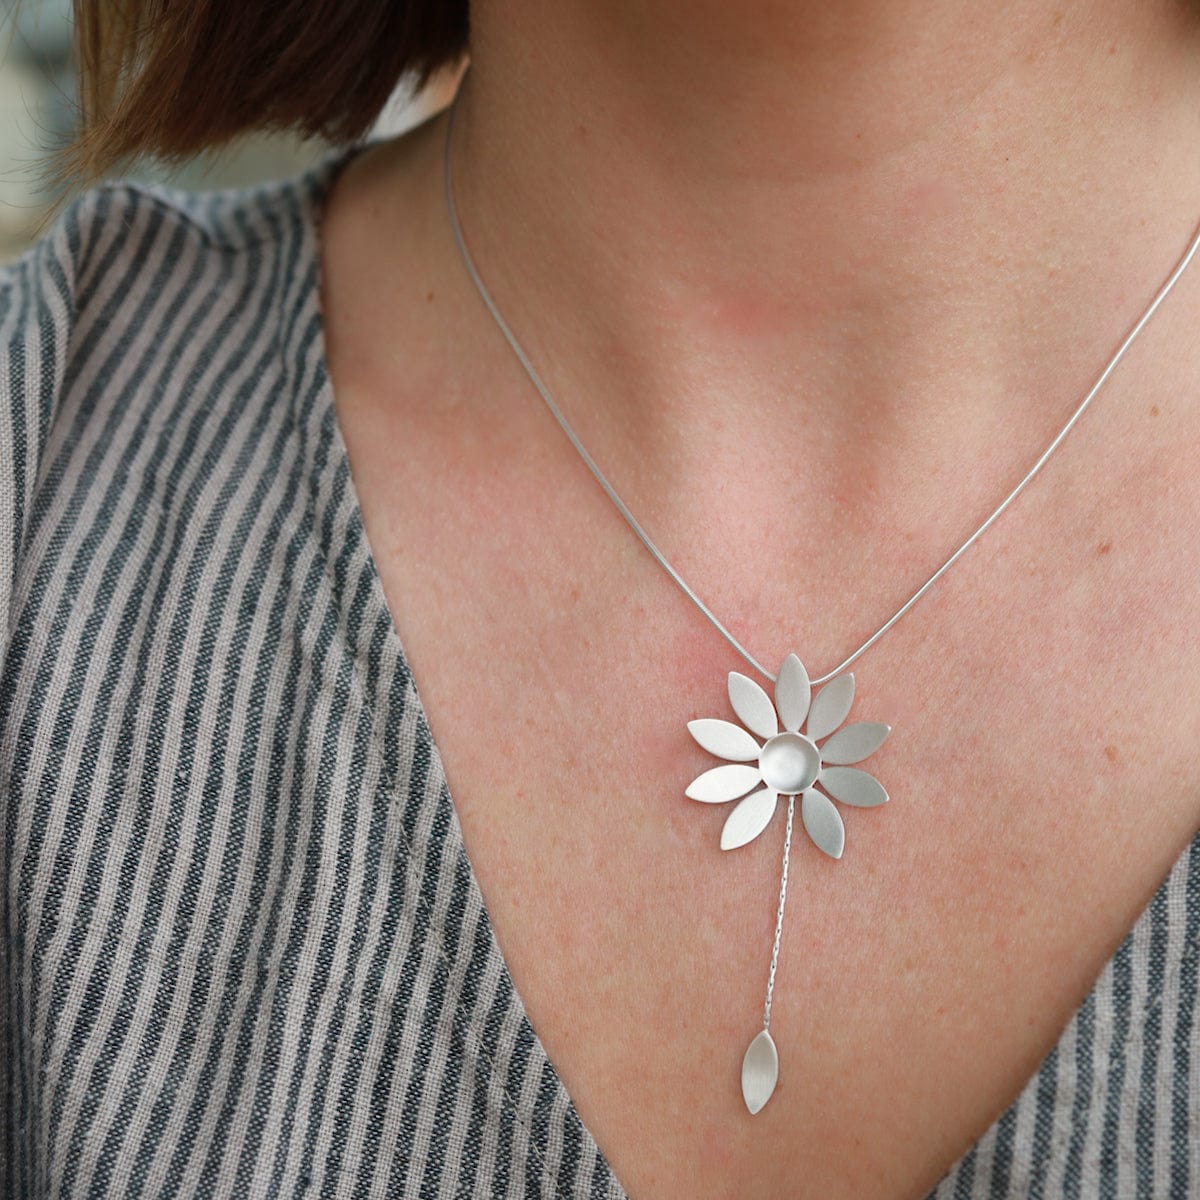 Buy Sunflower Necklace Silver Sunflower Jewelry Gift for Women Online in  India - Etsy